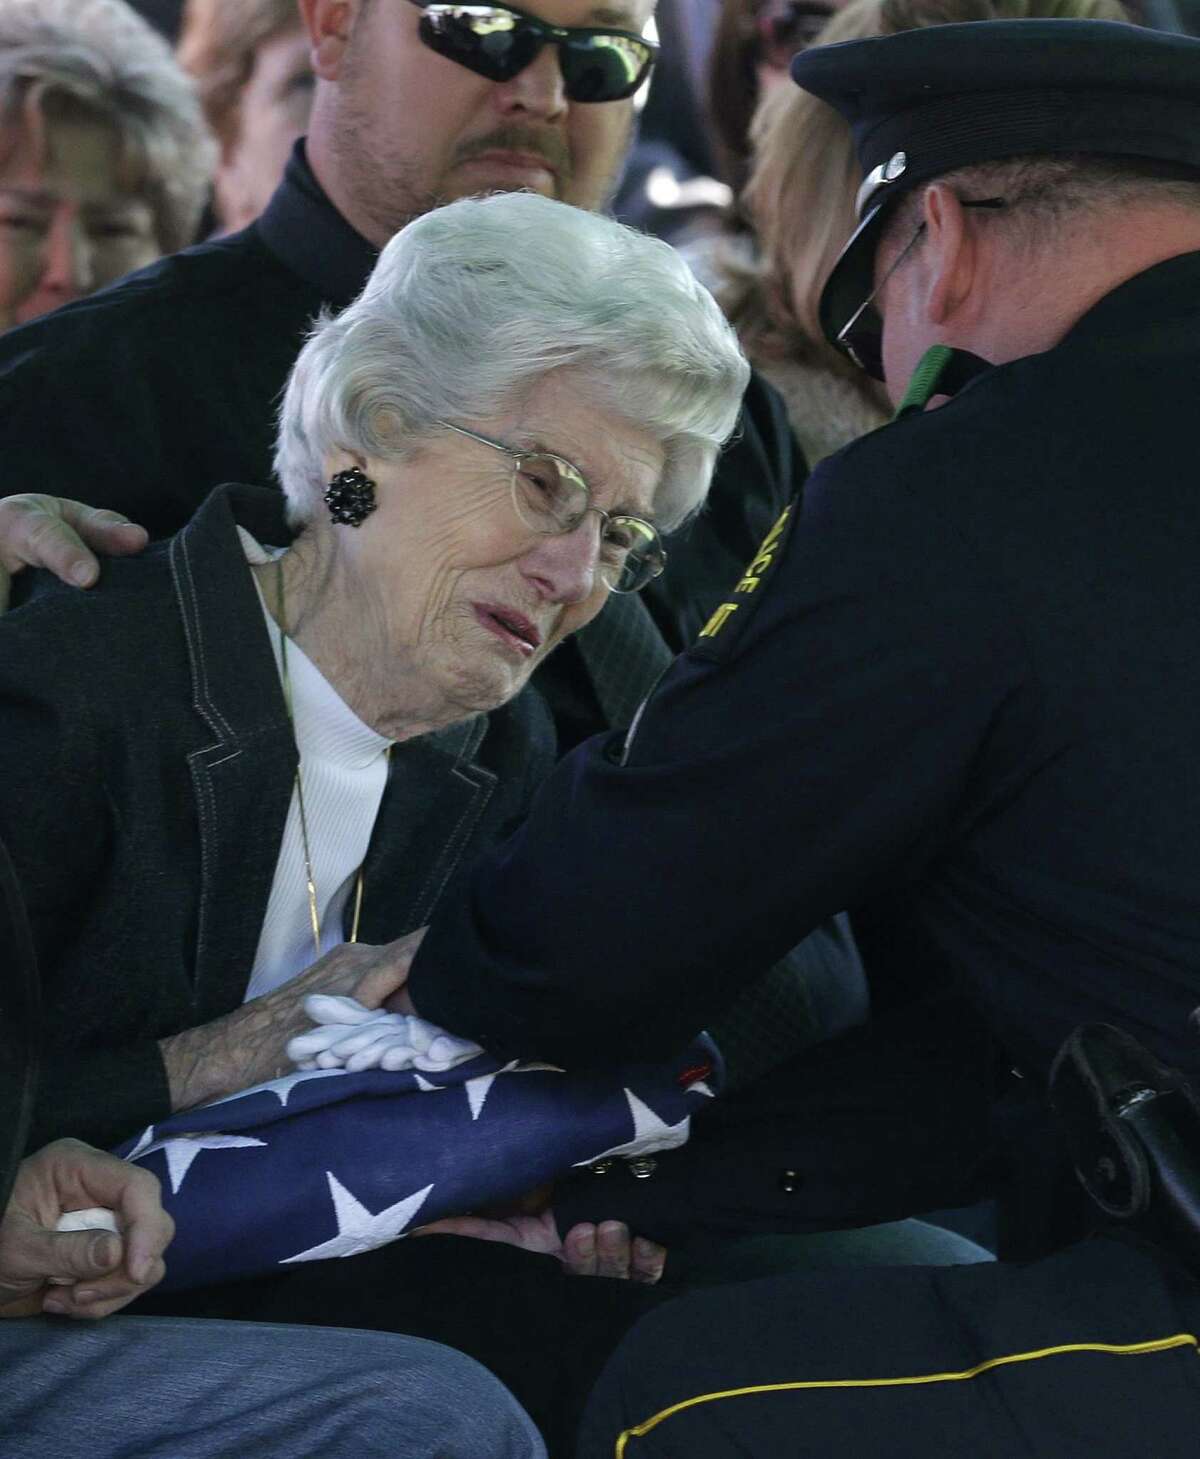 Wyvonne McLelland, mother of Mike McLelland, receives a flag from Nathan Foreman during the funeral.